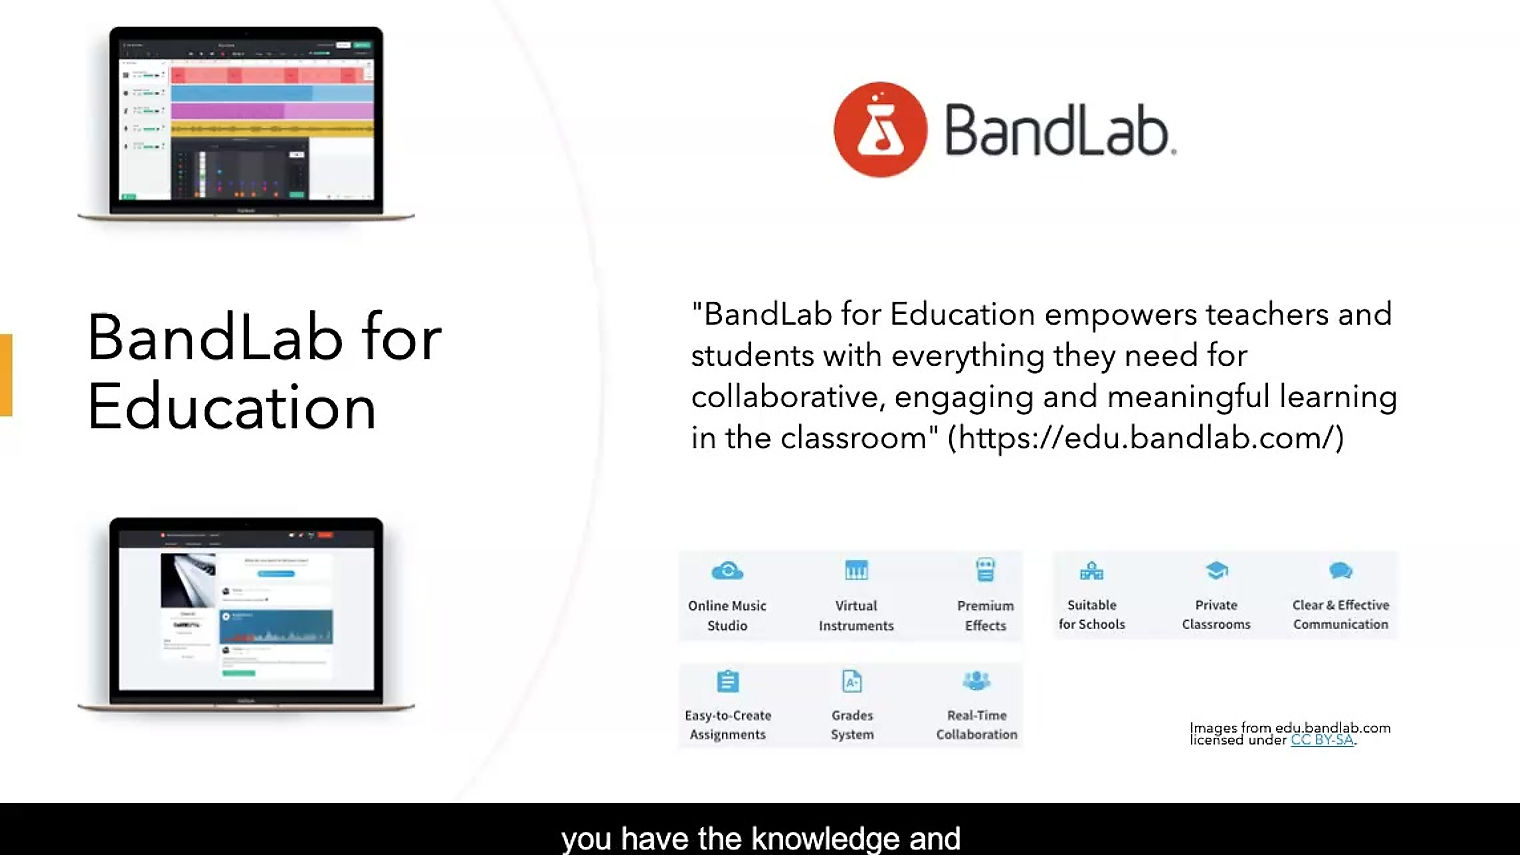 Introduction to BandLab for Education